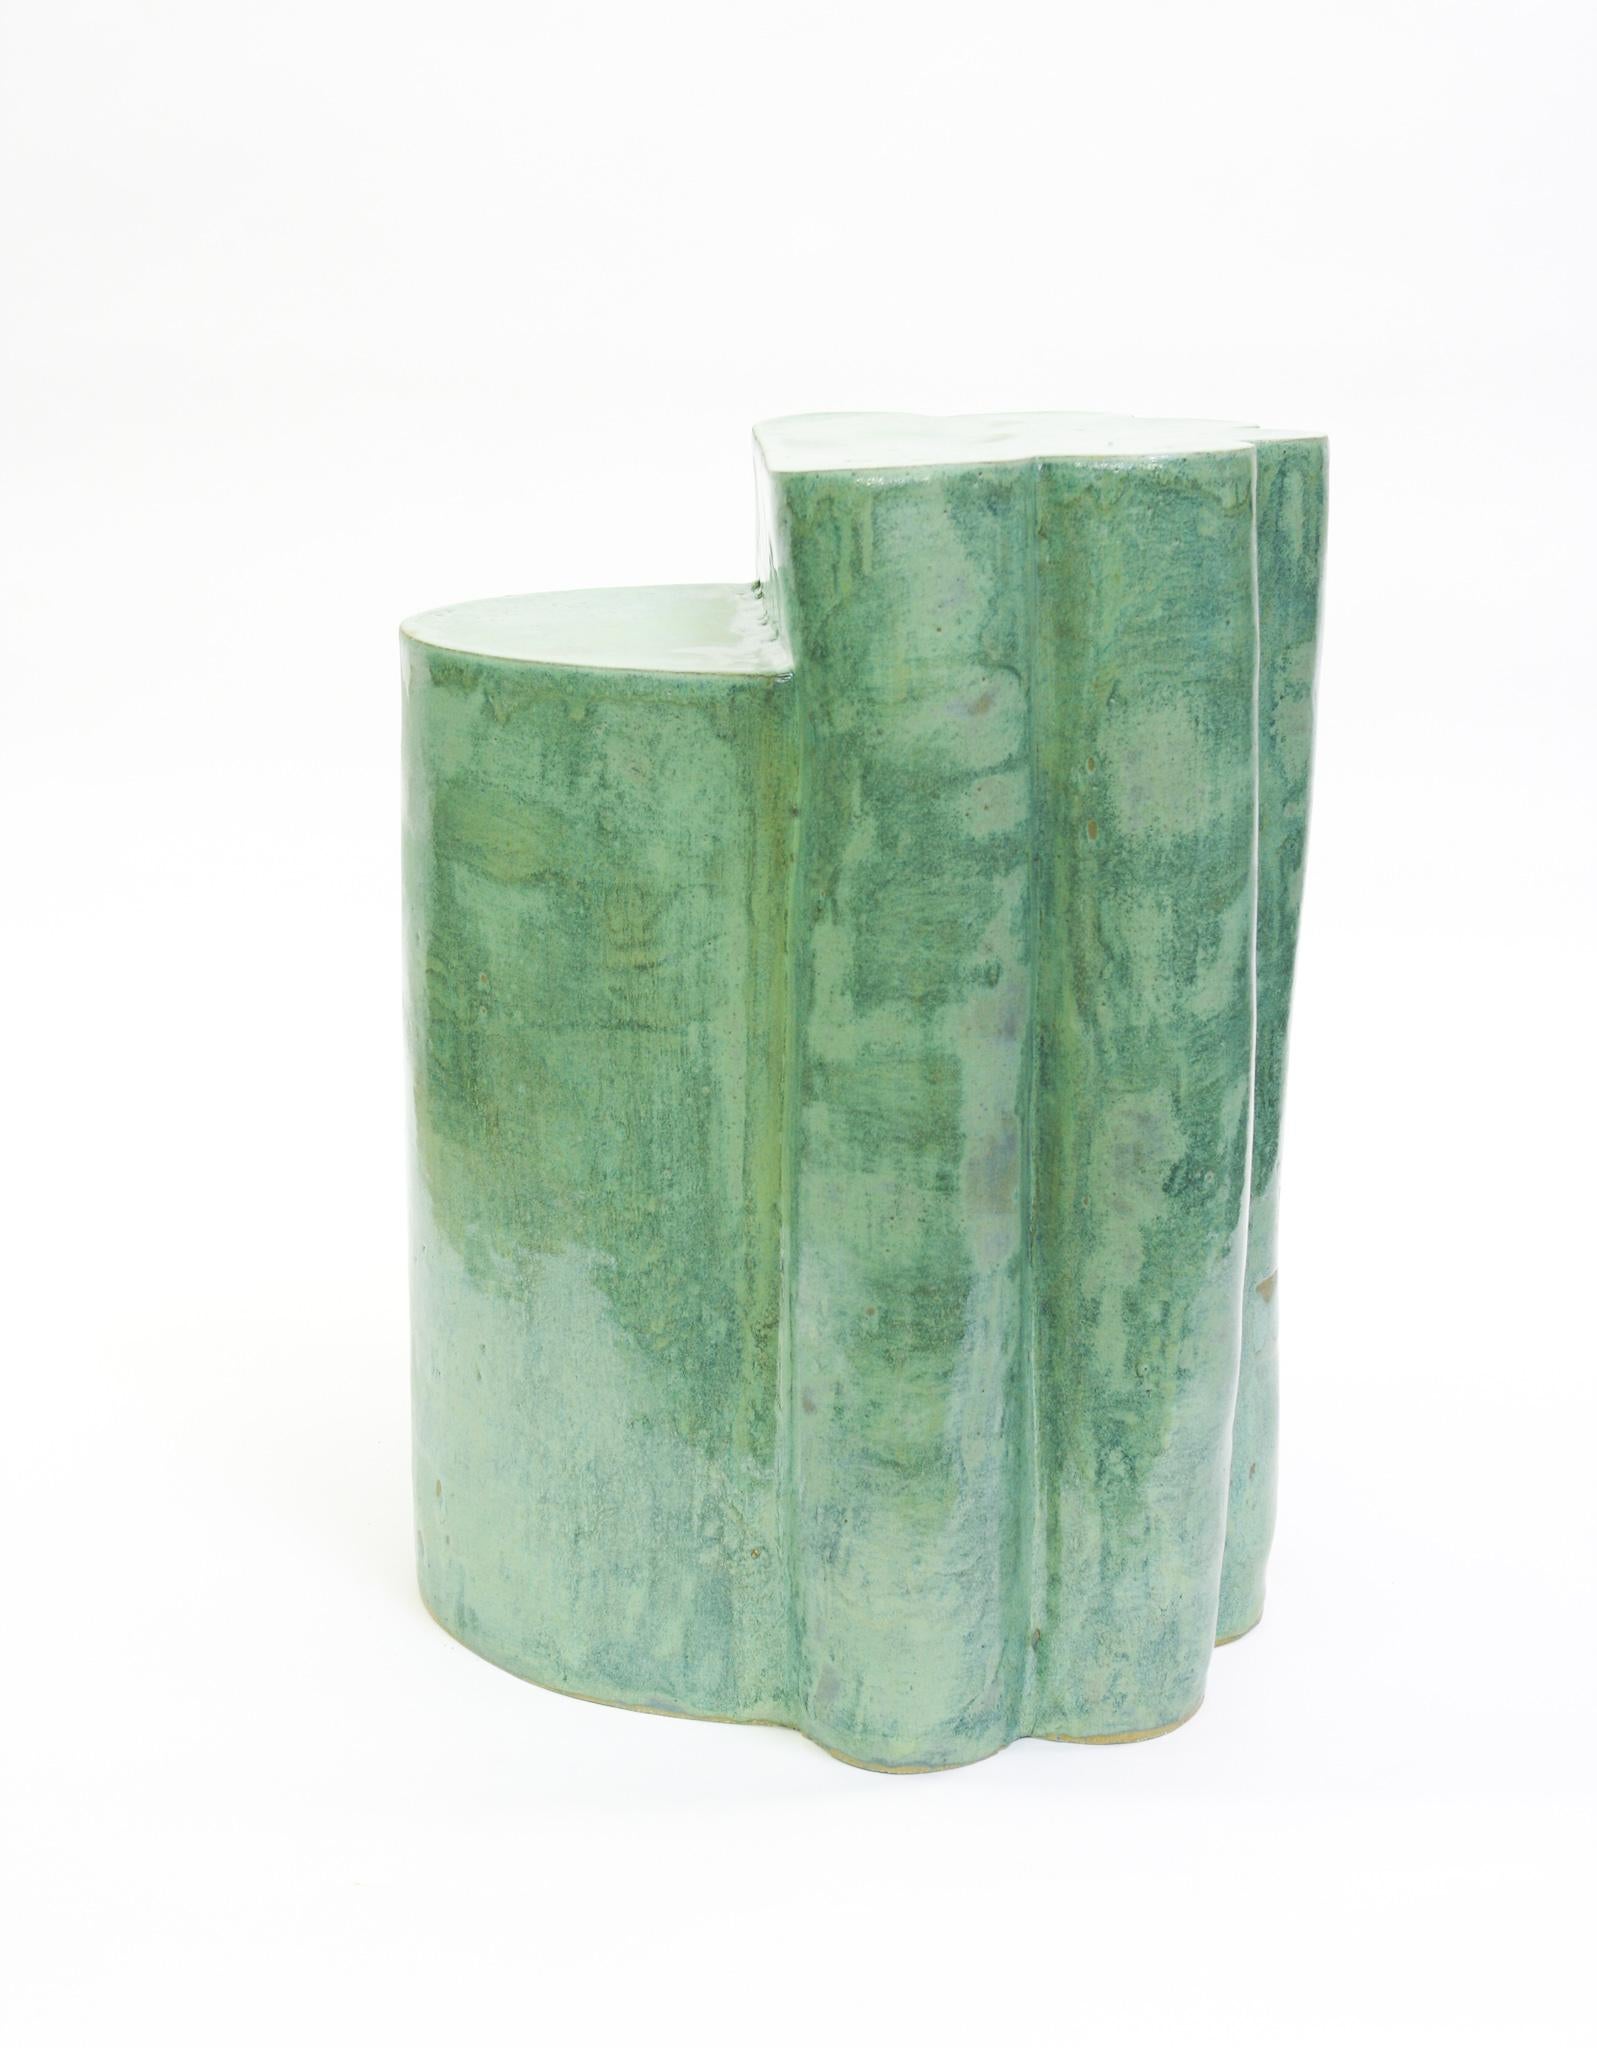 American Ceramic Ledge Side Table & Stool in Jade by BZIPPY For Sale